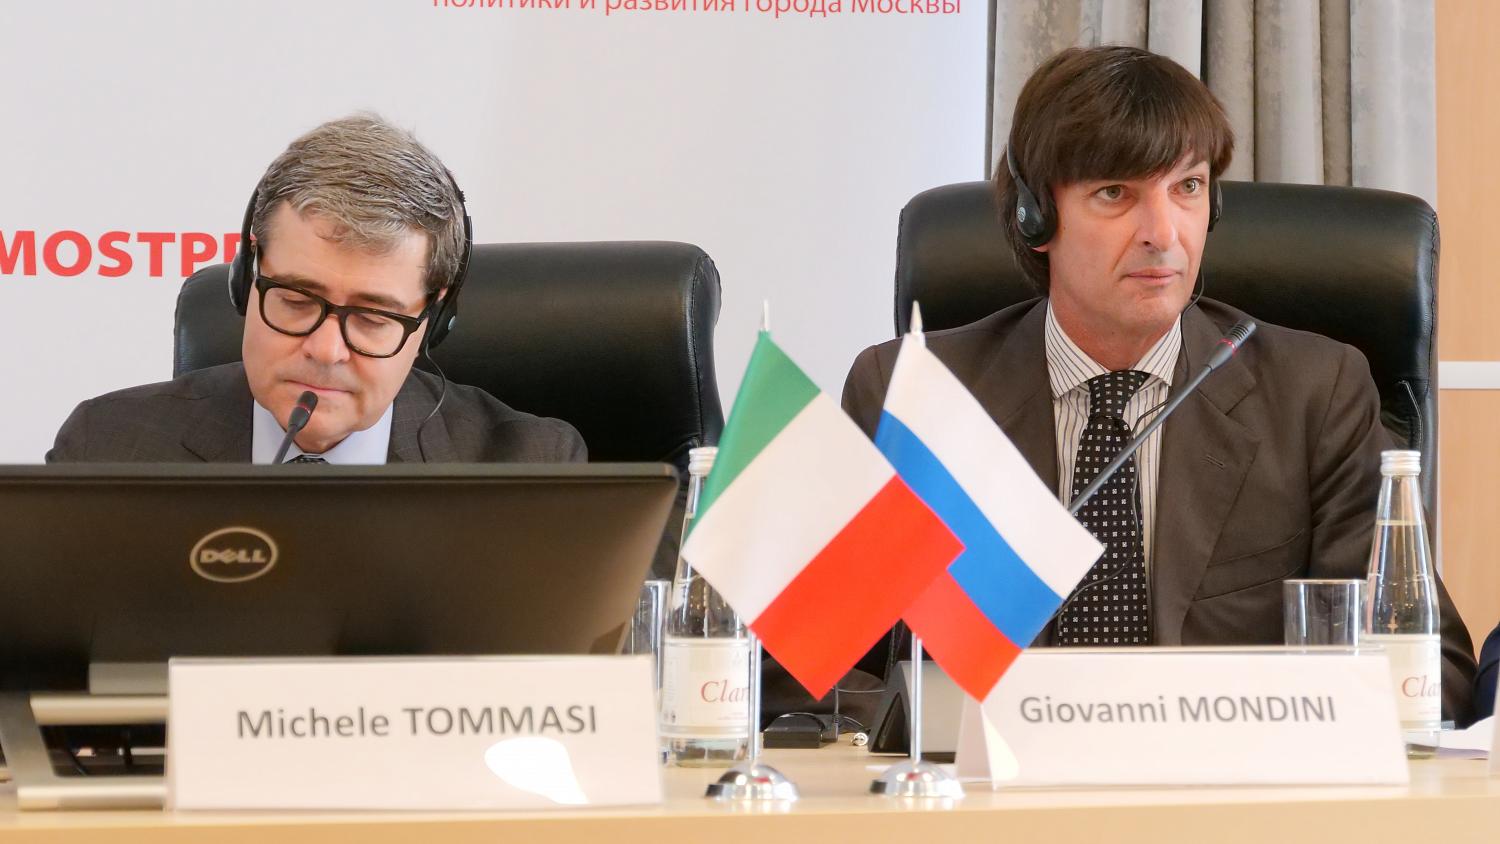 A Forum of the Russian-Italian cooperation was held at the MCCI